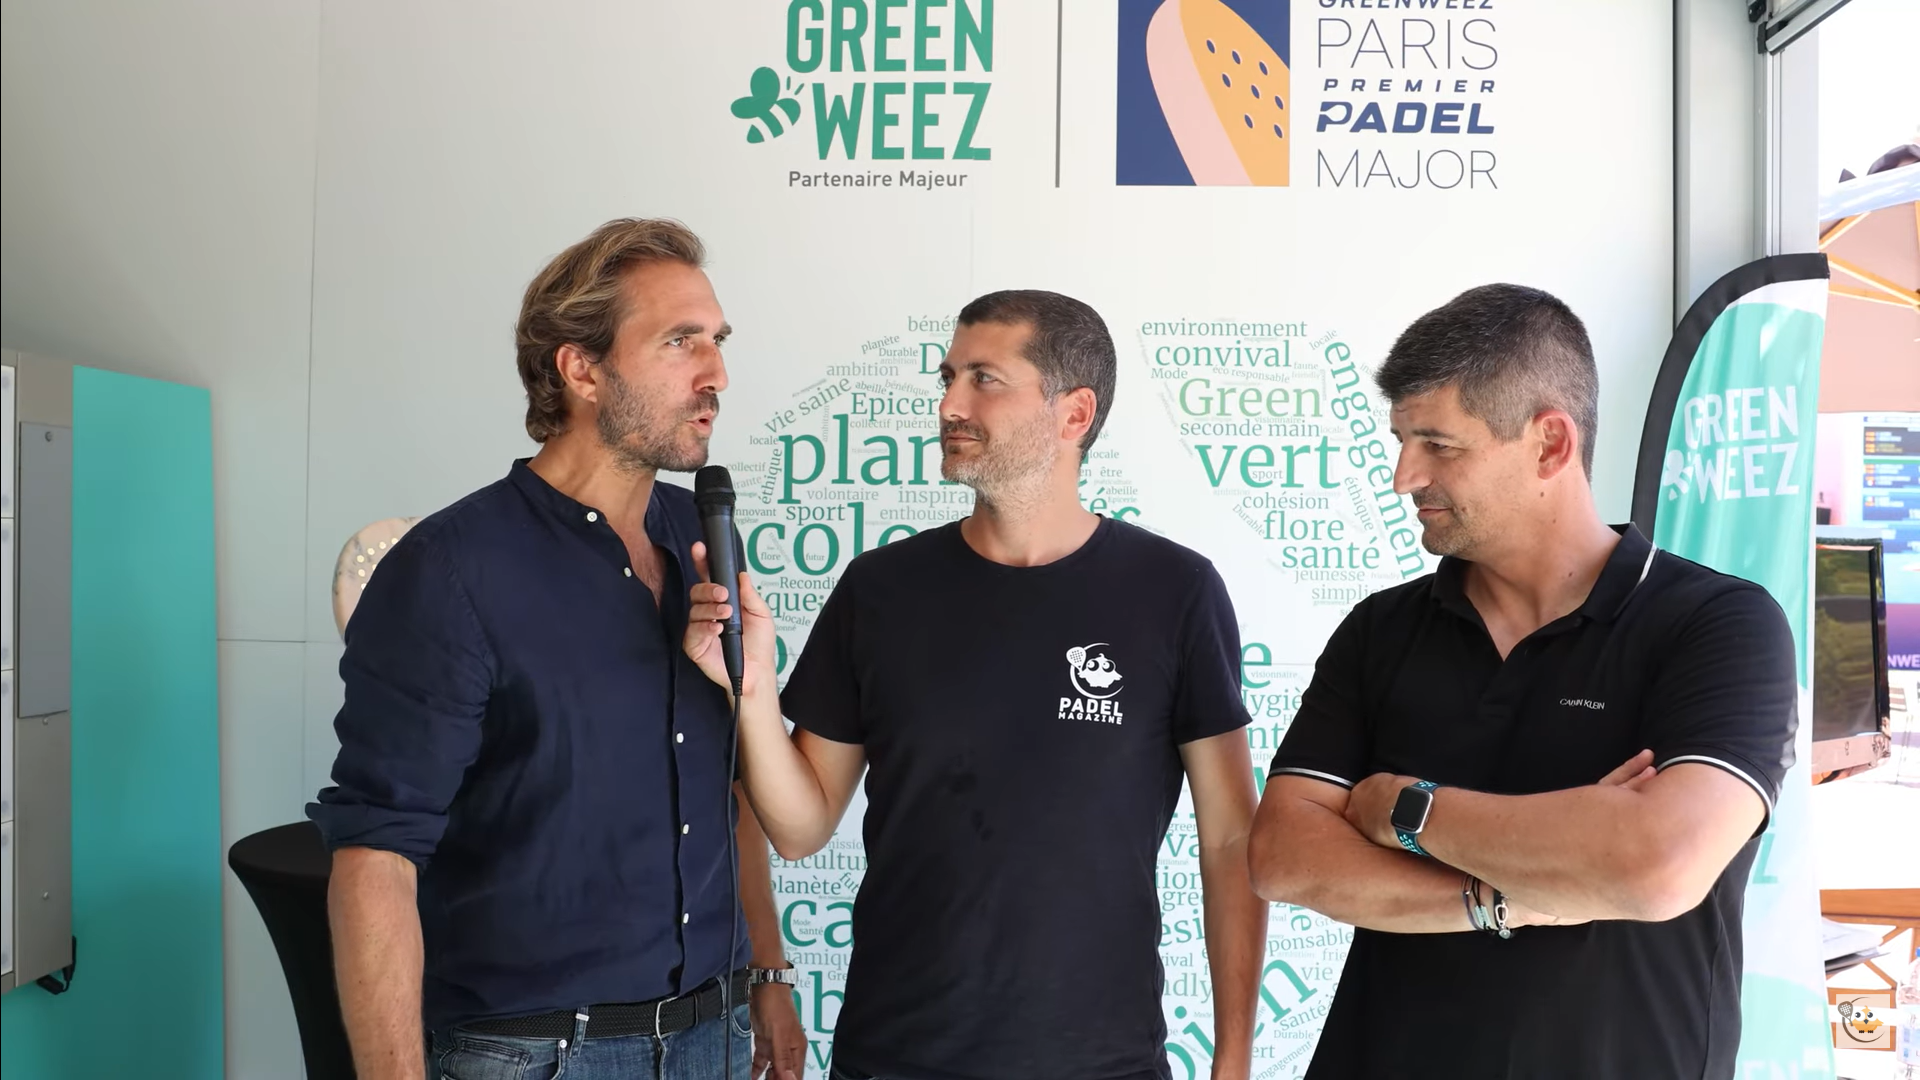 Di Pasquale/Roy: “Greenweez/FFT, a lasting partnership”